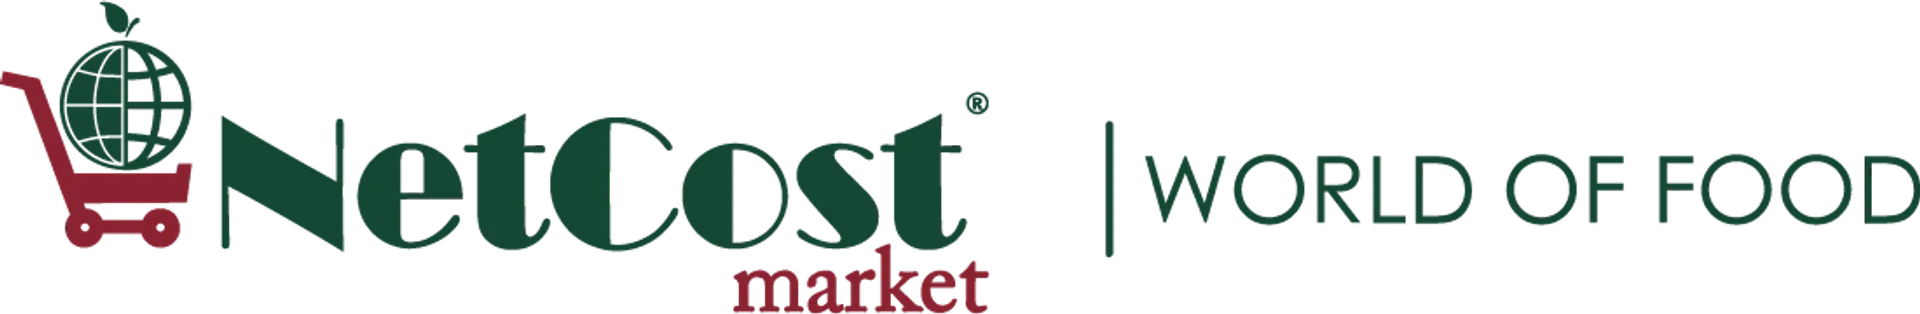 NETCOST MARKET logo. Current weekly ad